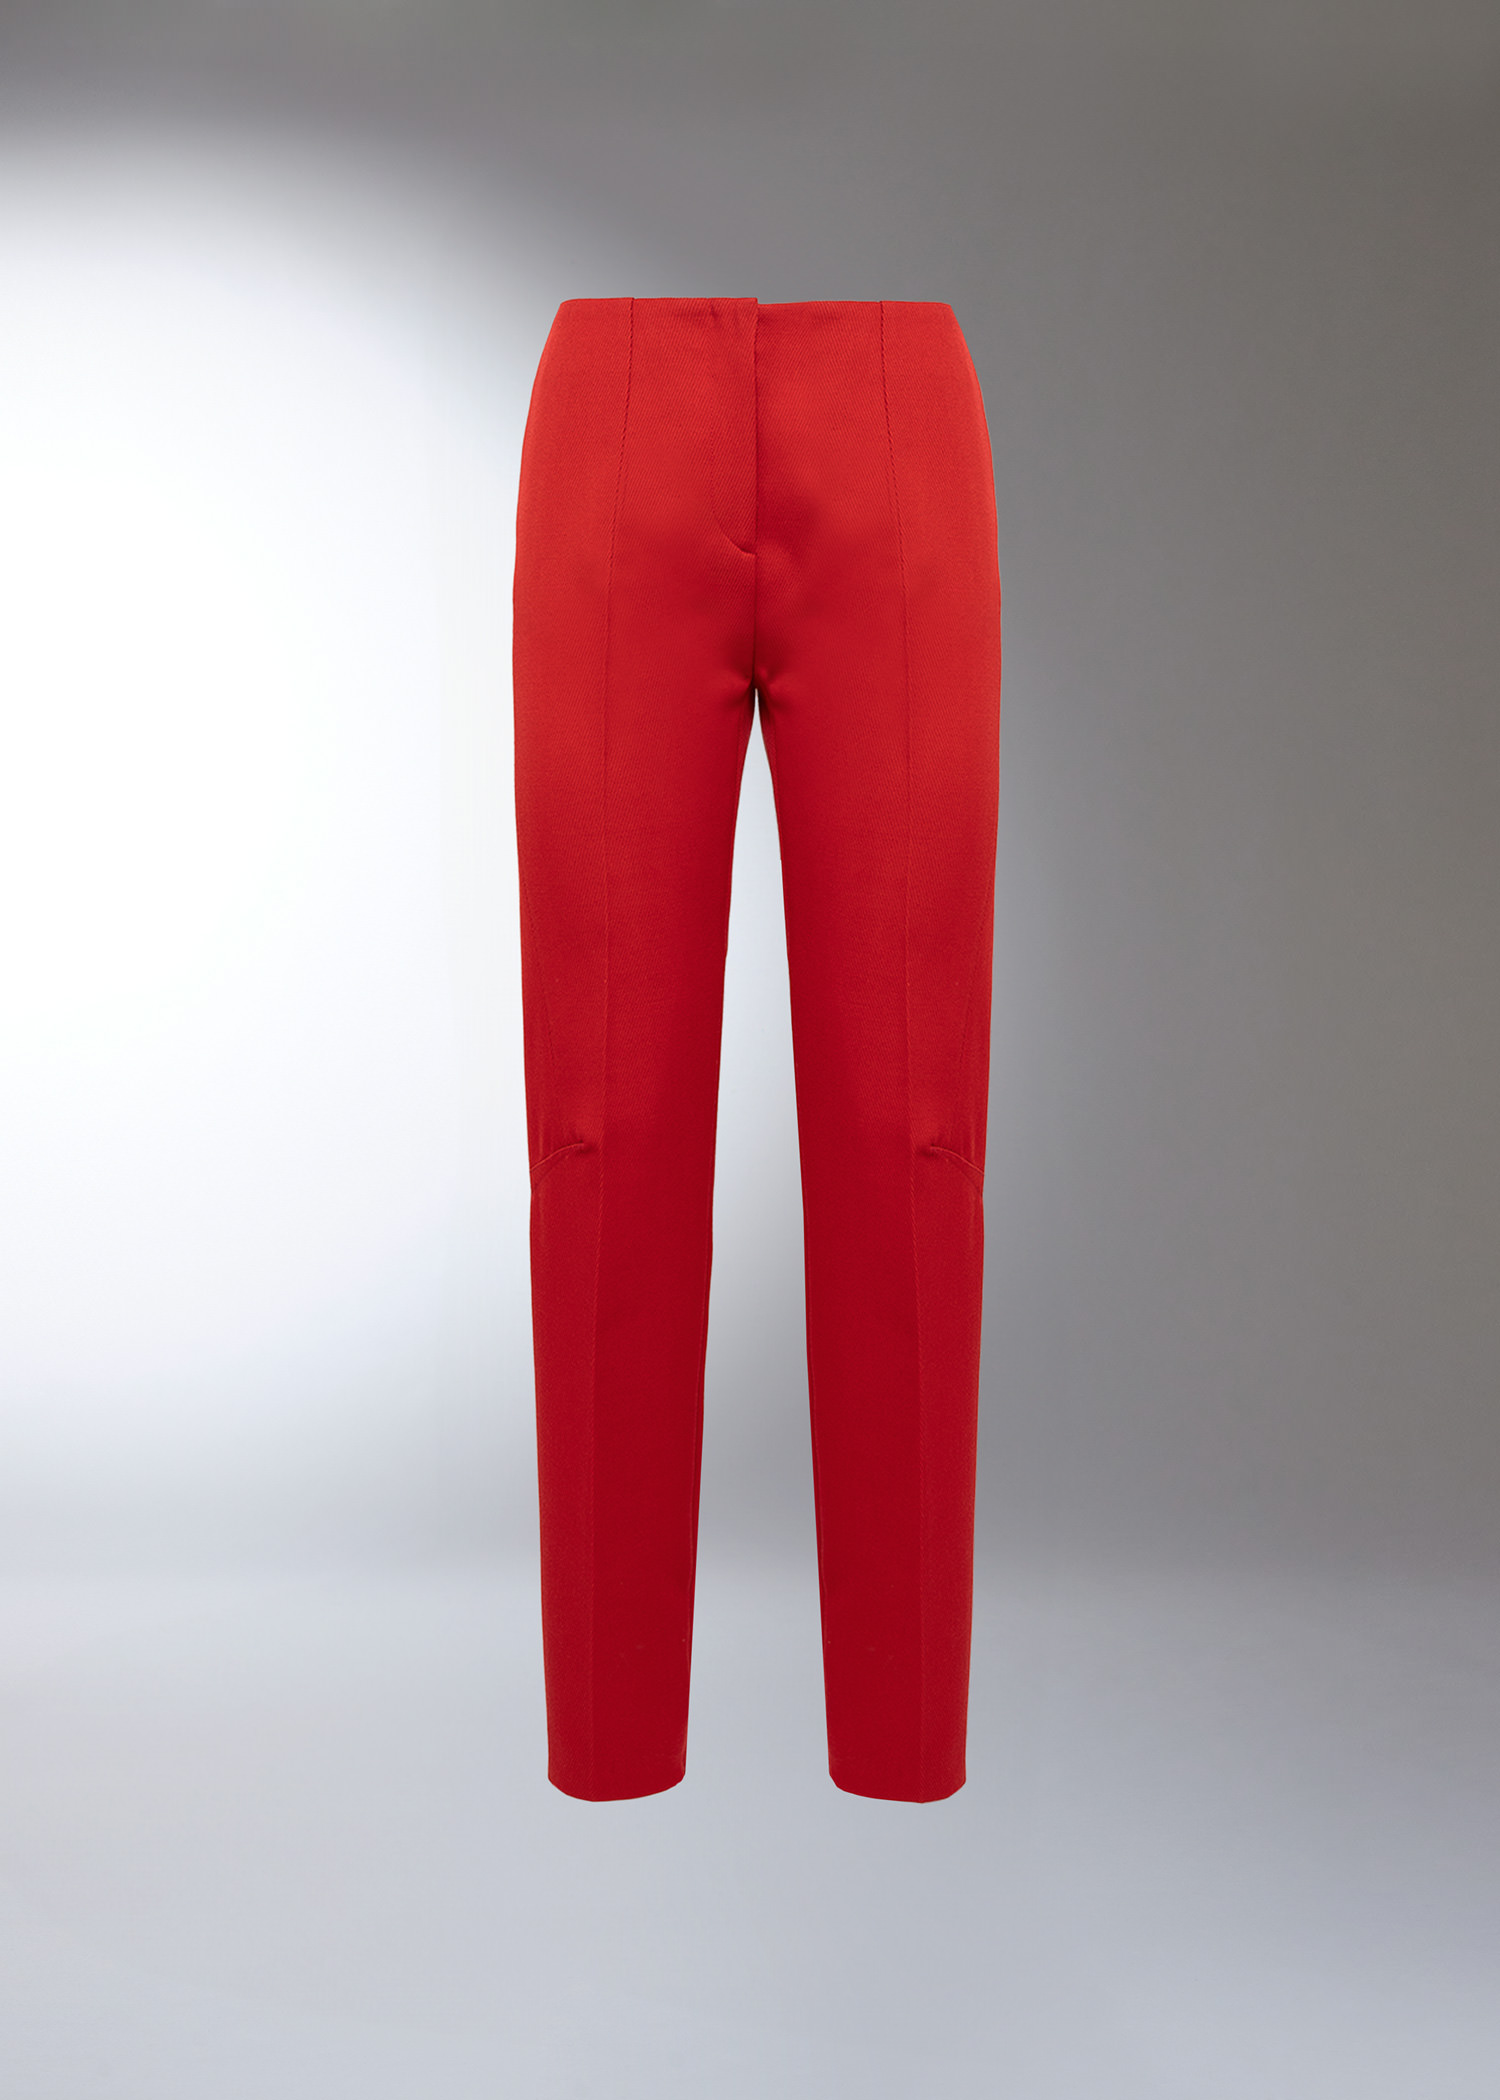 Red Tornado French Style Casual Pants High Waisted Mens Trousers Little  Tapered | eBay